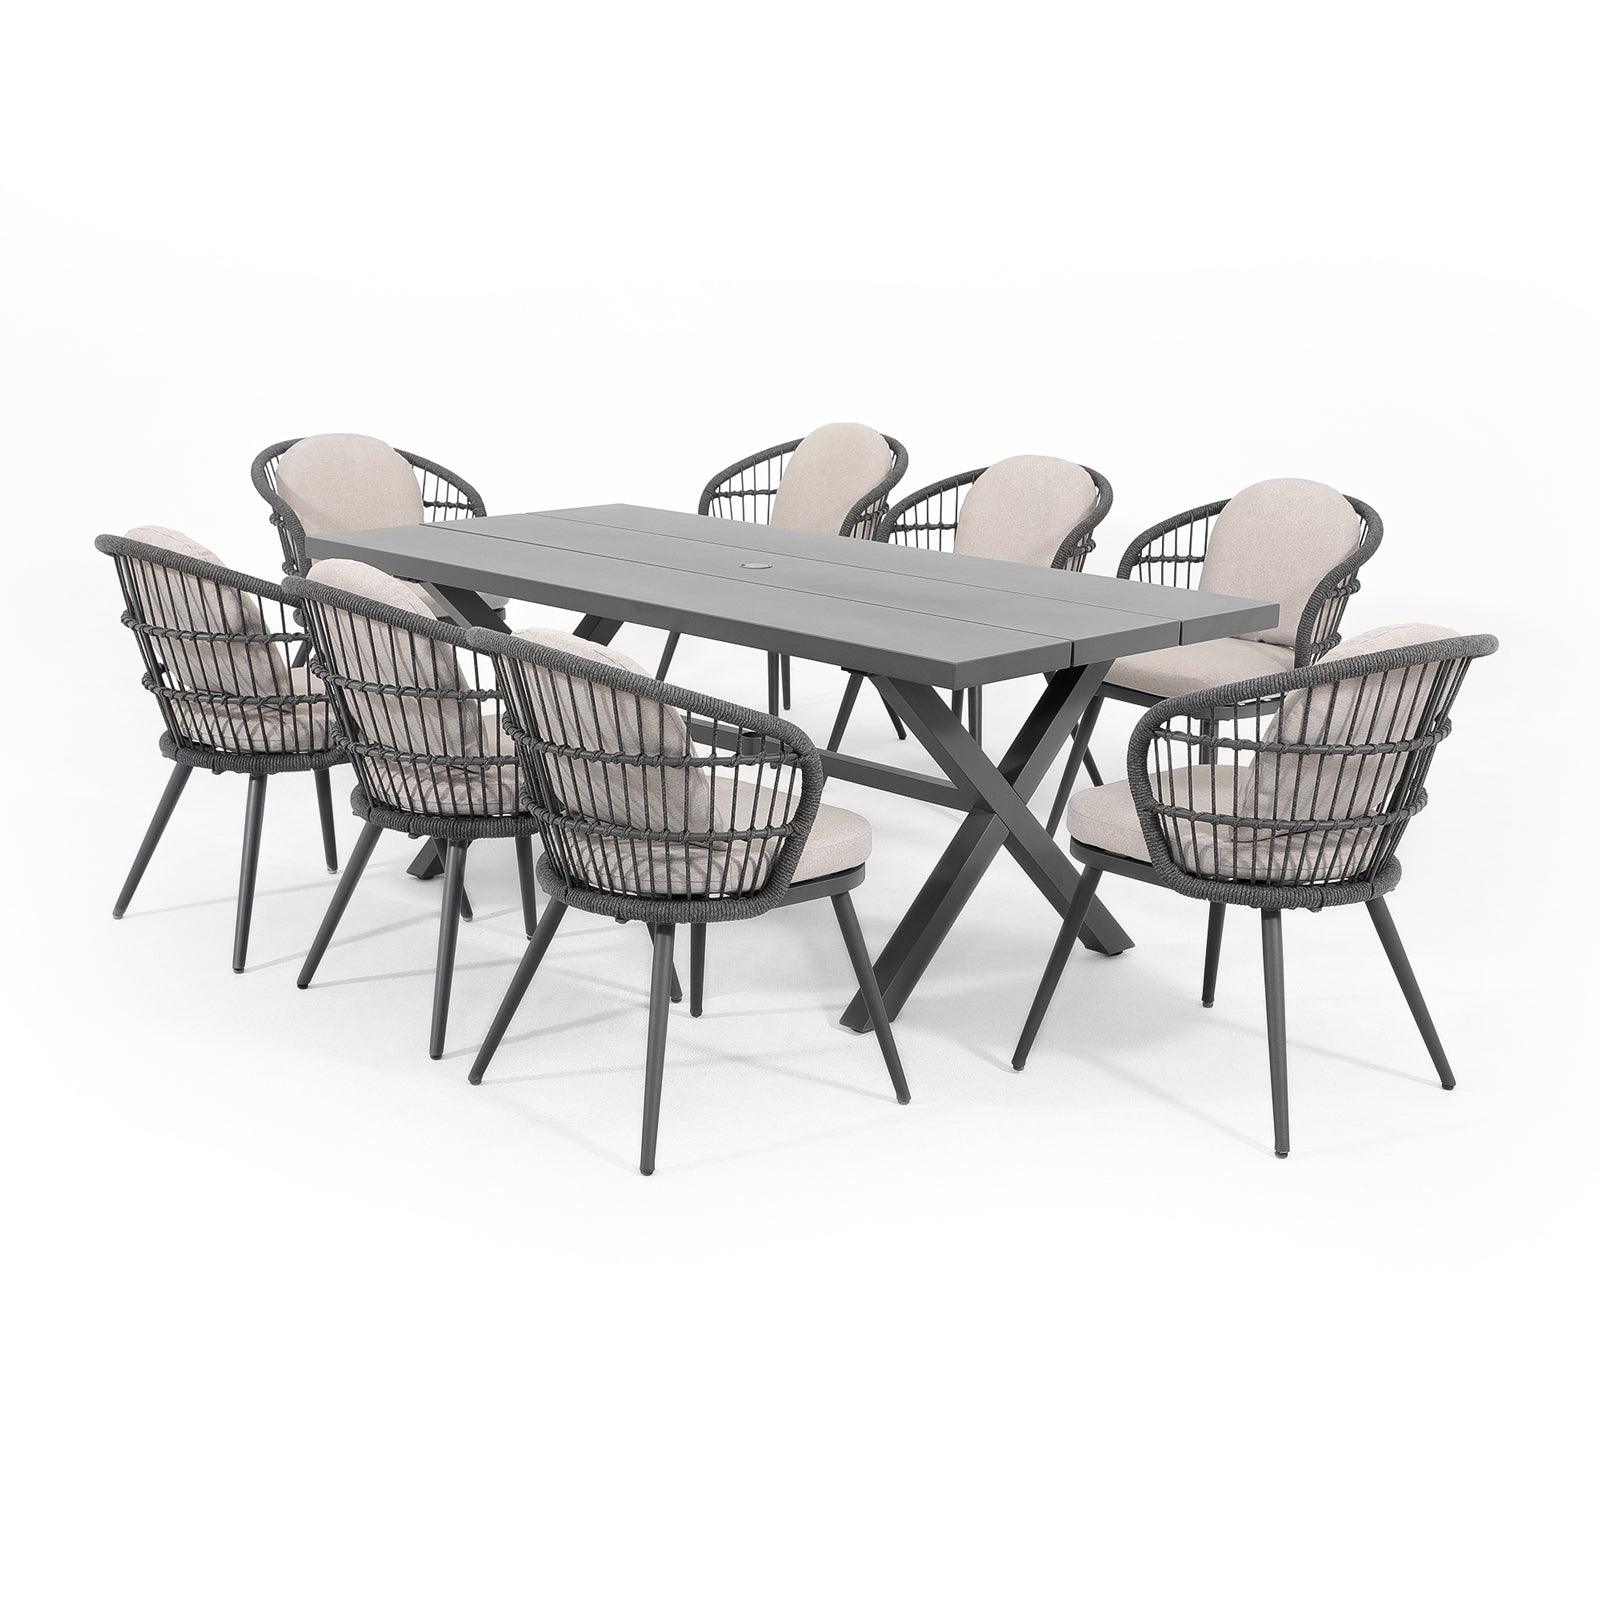 Comino Modern Rope Outdoor Furniture, dark grey aluminum frame outdoor Dining Set for 8 with light grey cushions, 8 dining seats with backrest rope design, 1 rectangle aluminum dining table with x-shaped legs - Jardina Furniture#Pieces_9-pc.